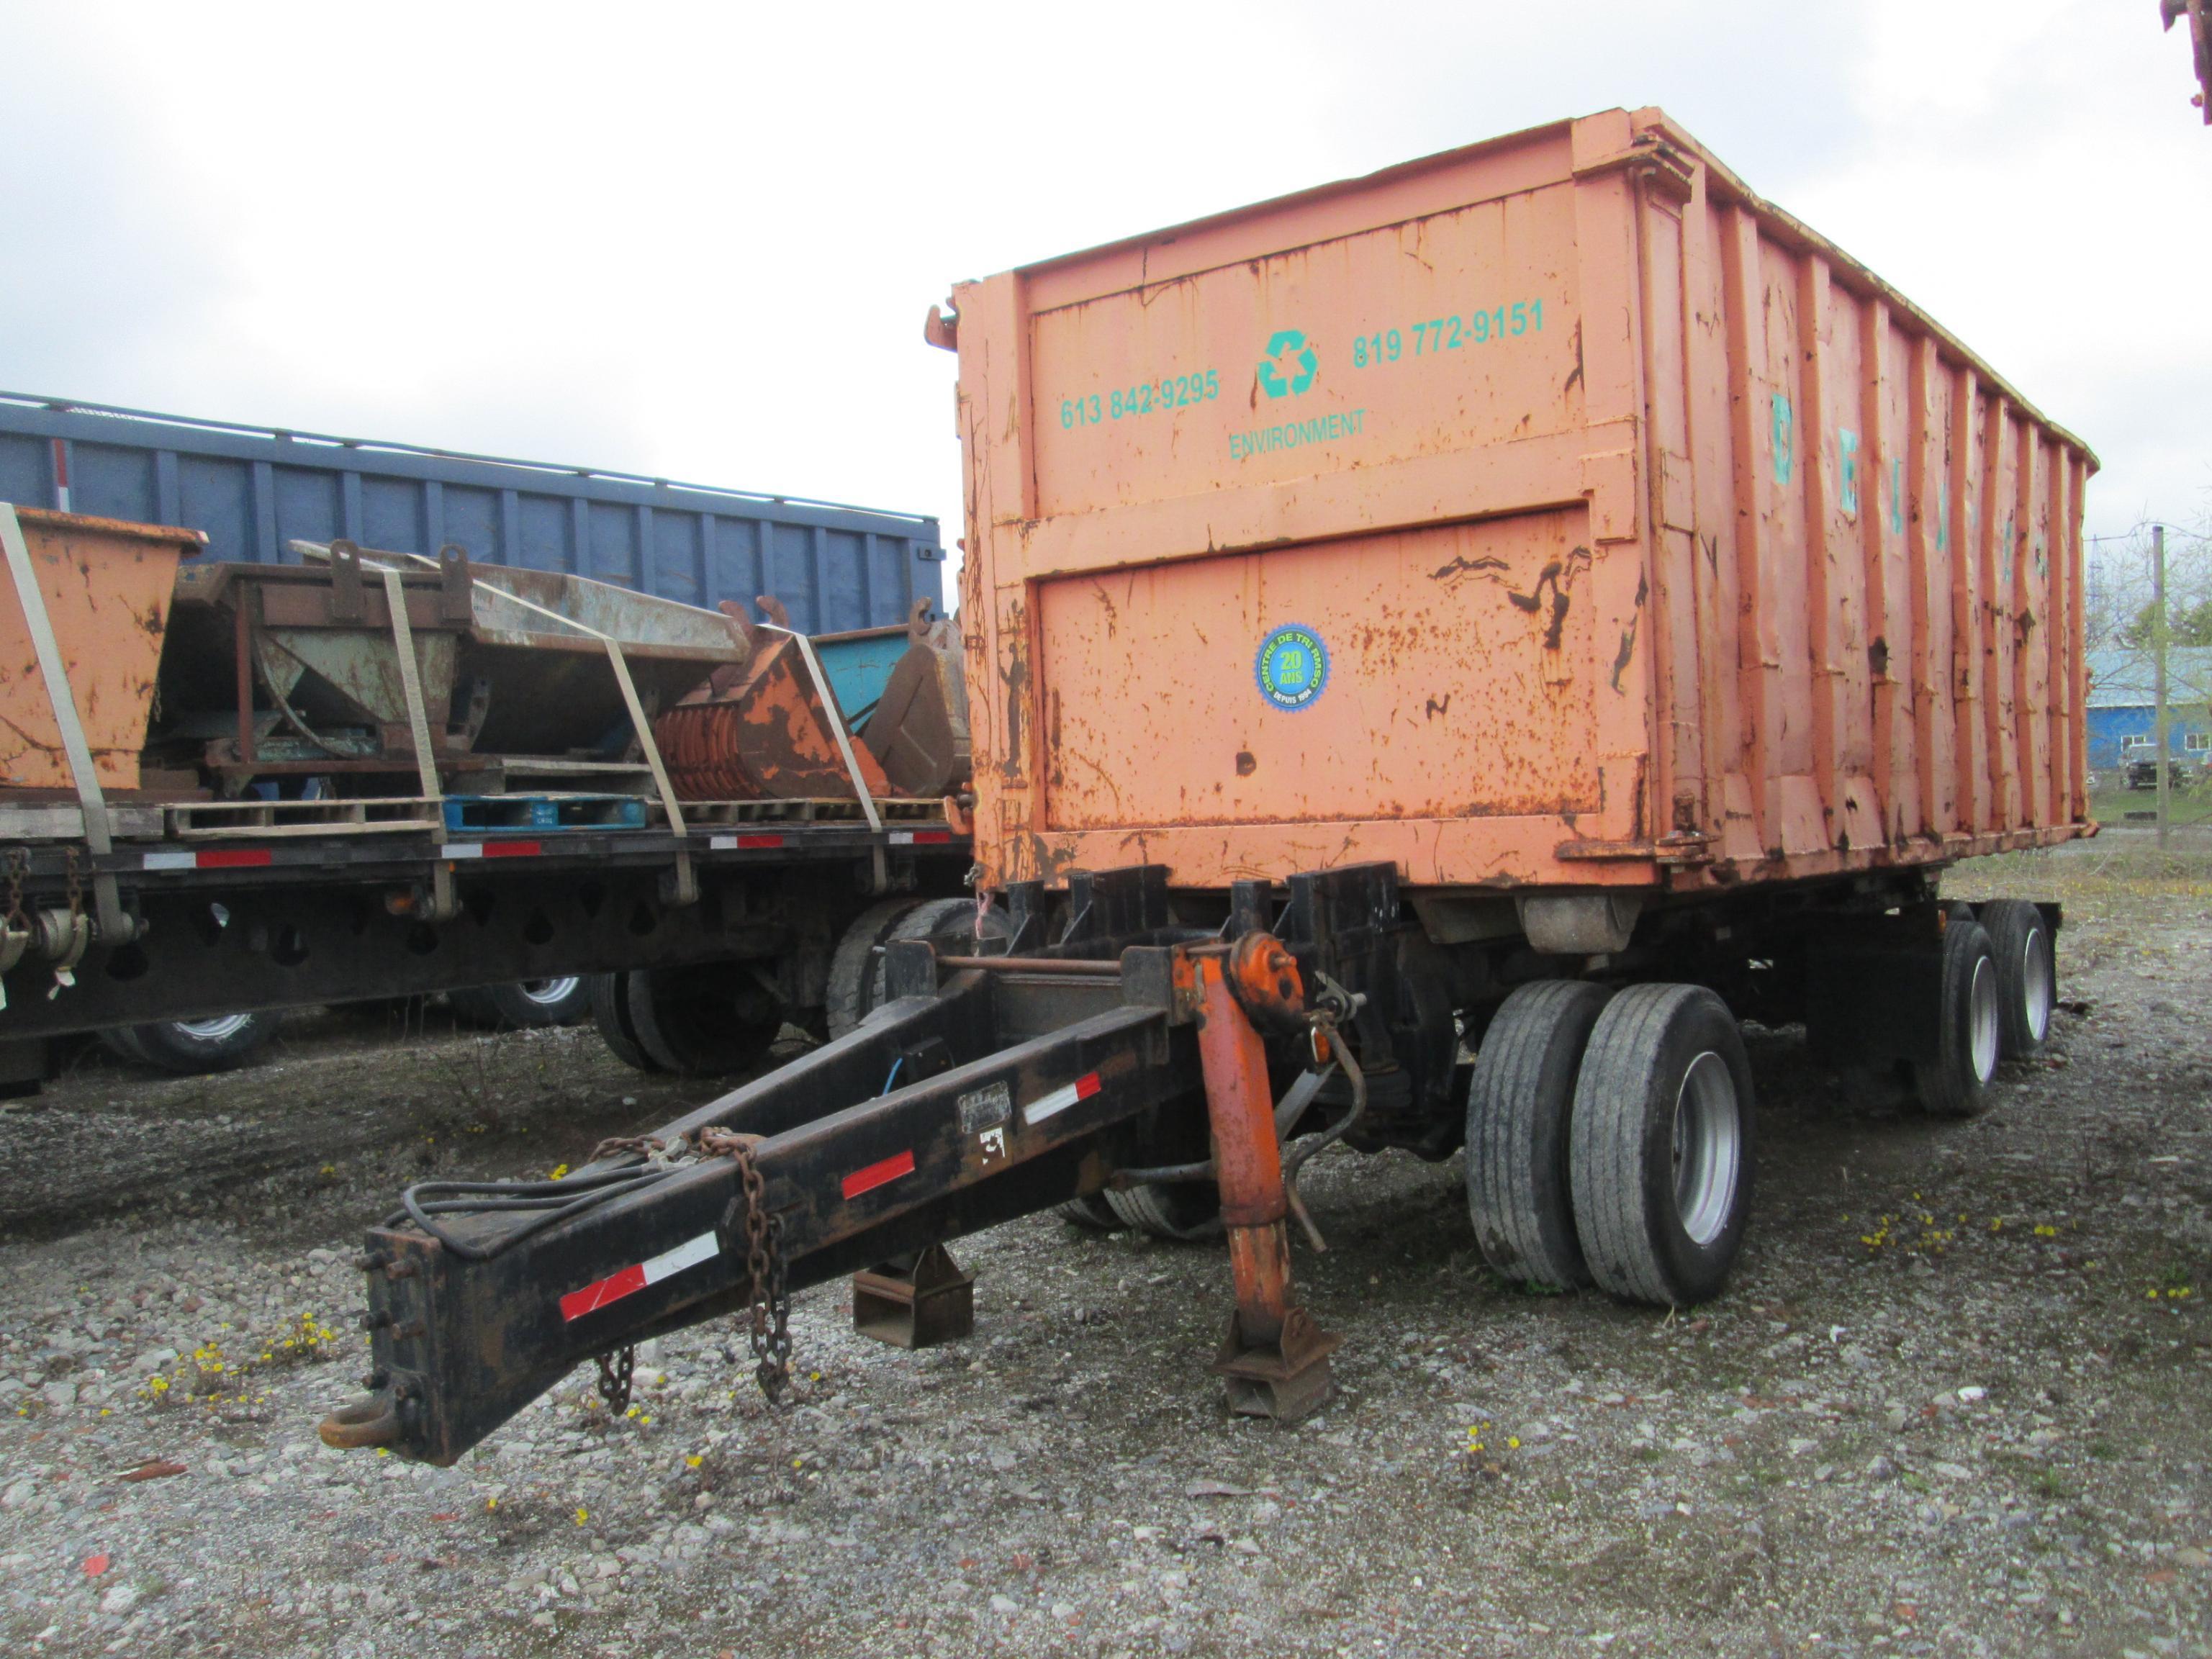 ROLLOFF TRAILER 1994 Atlas TR-26 Tri / axle 26' Roll off Pup trailer SN 2L9RCNDD1RB062005 equipped